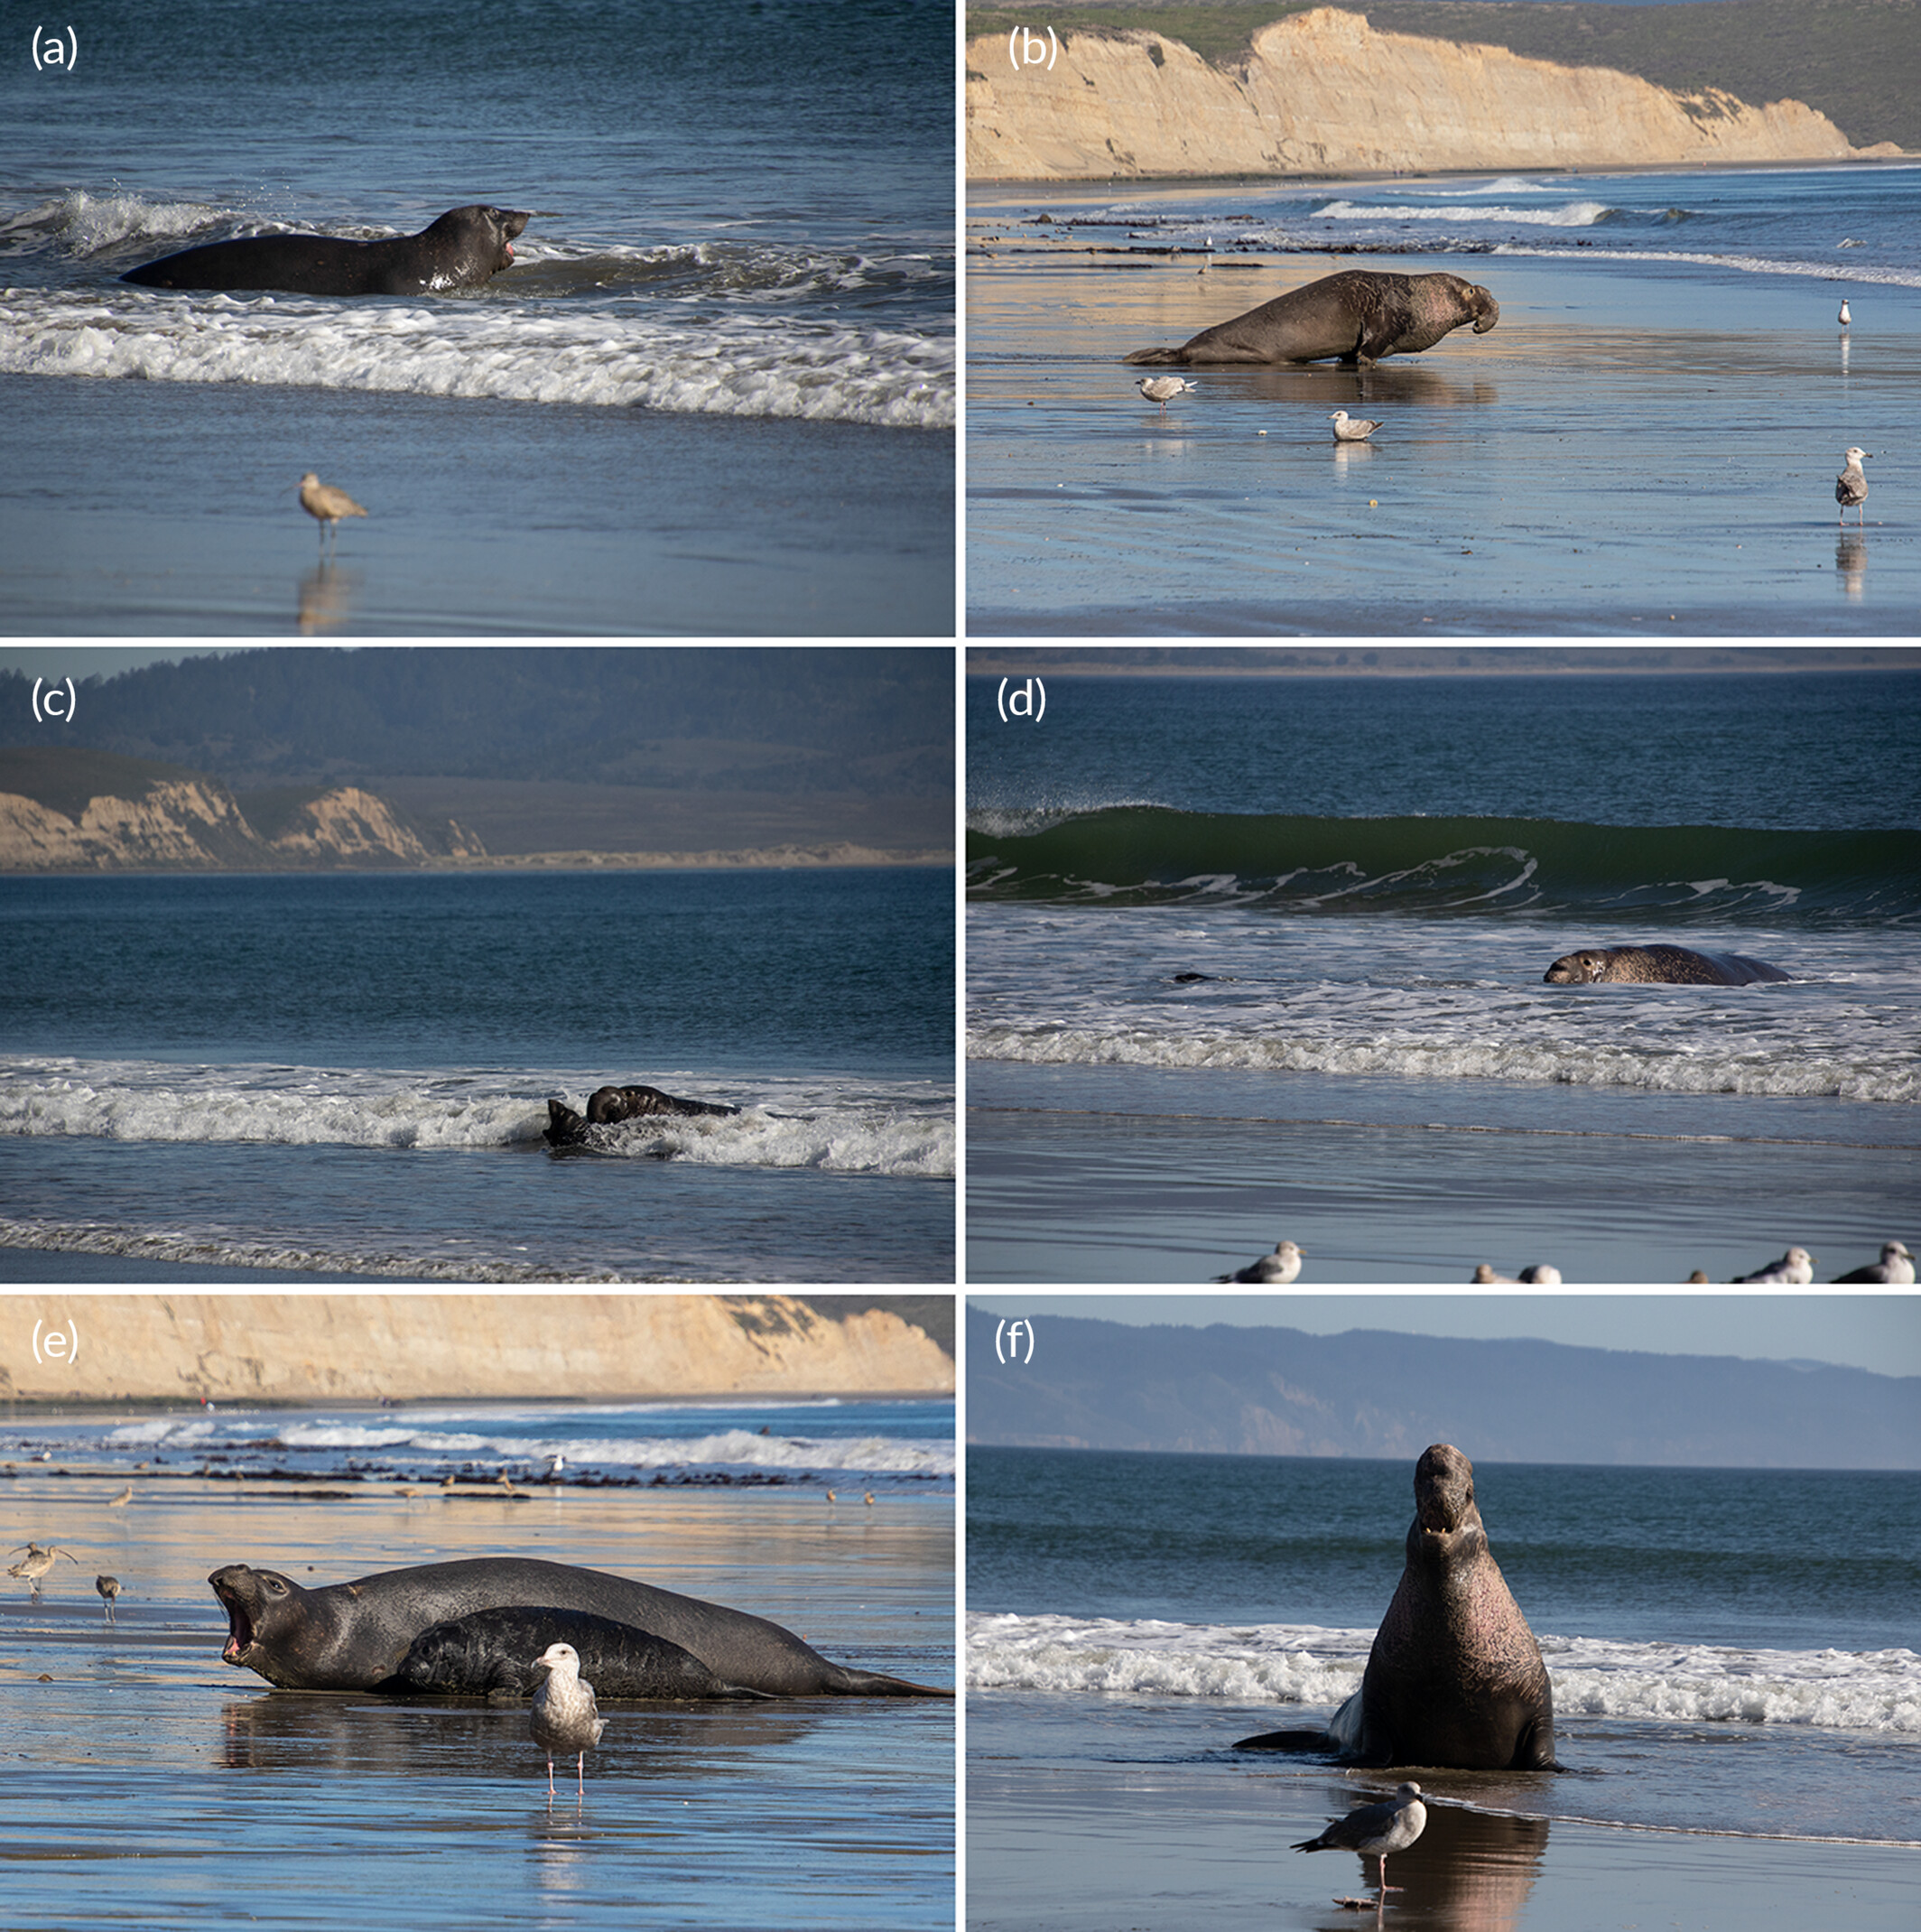 Male northern elephant seal saves drowning pup